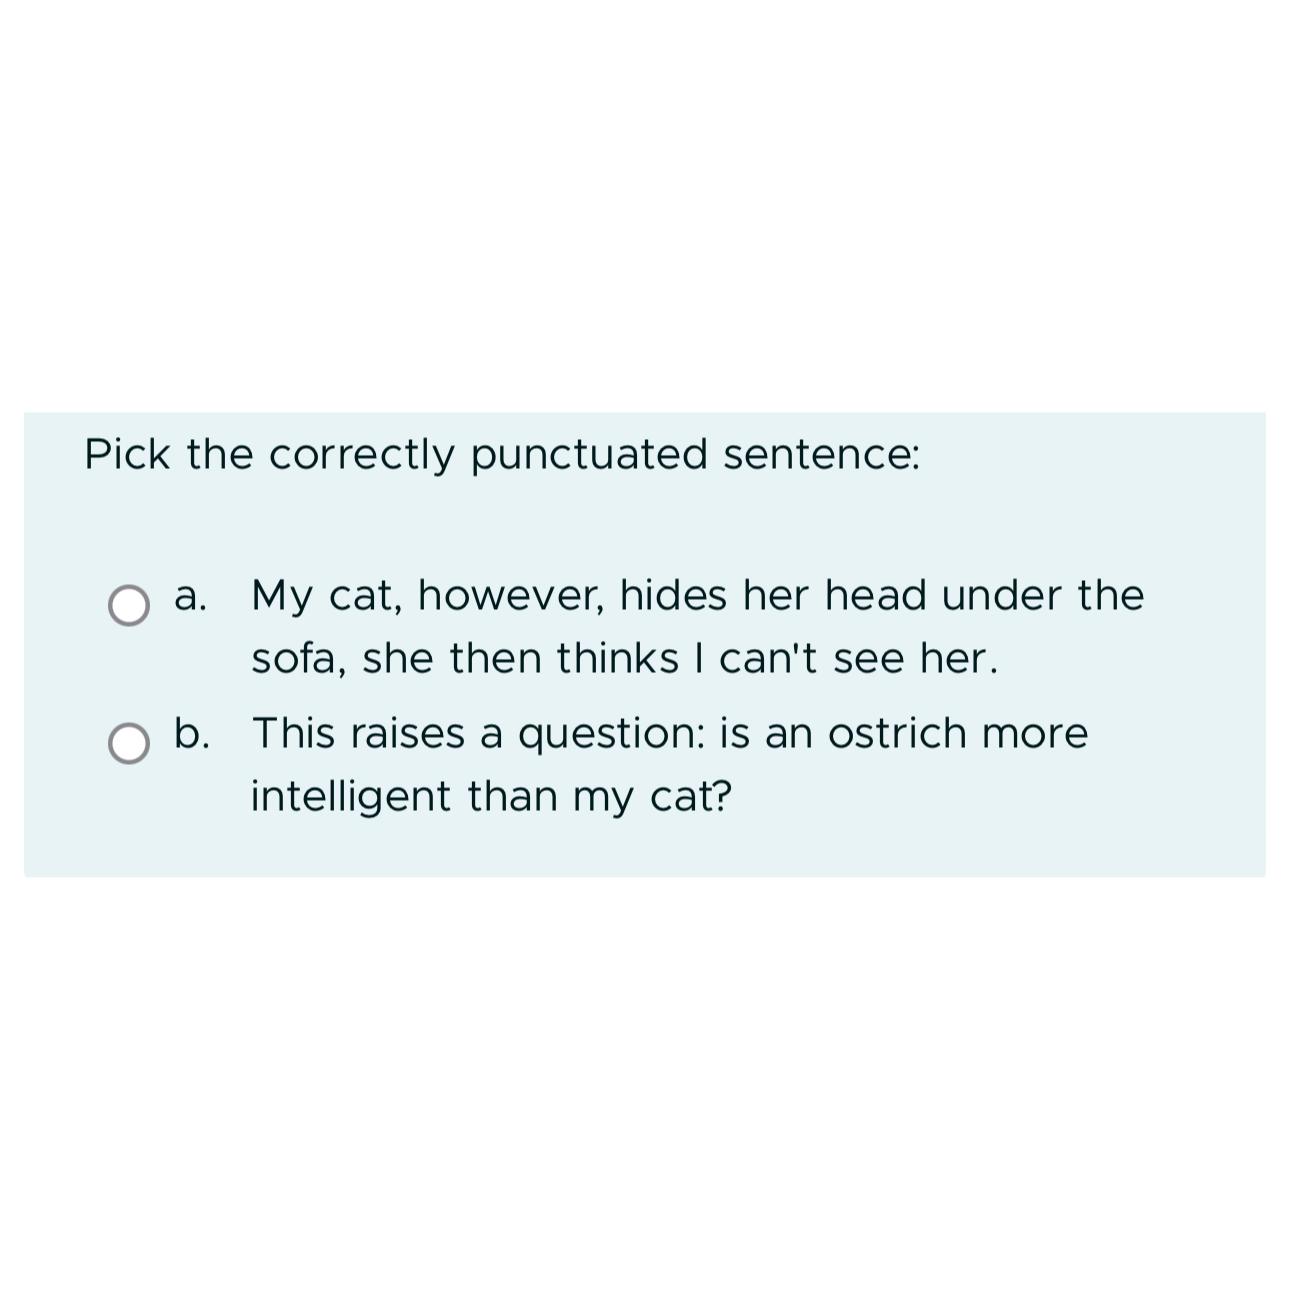 Pick the correctly punctuated sentence: a. My cat, however, hides her head under the sofa, she then thinks I